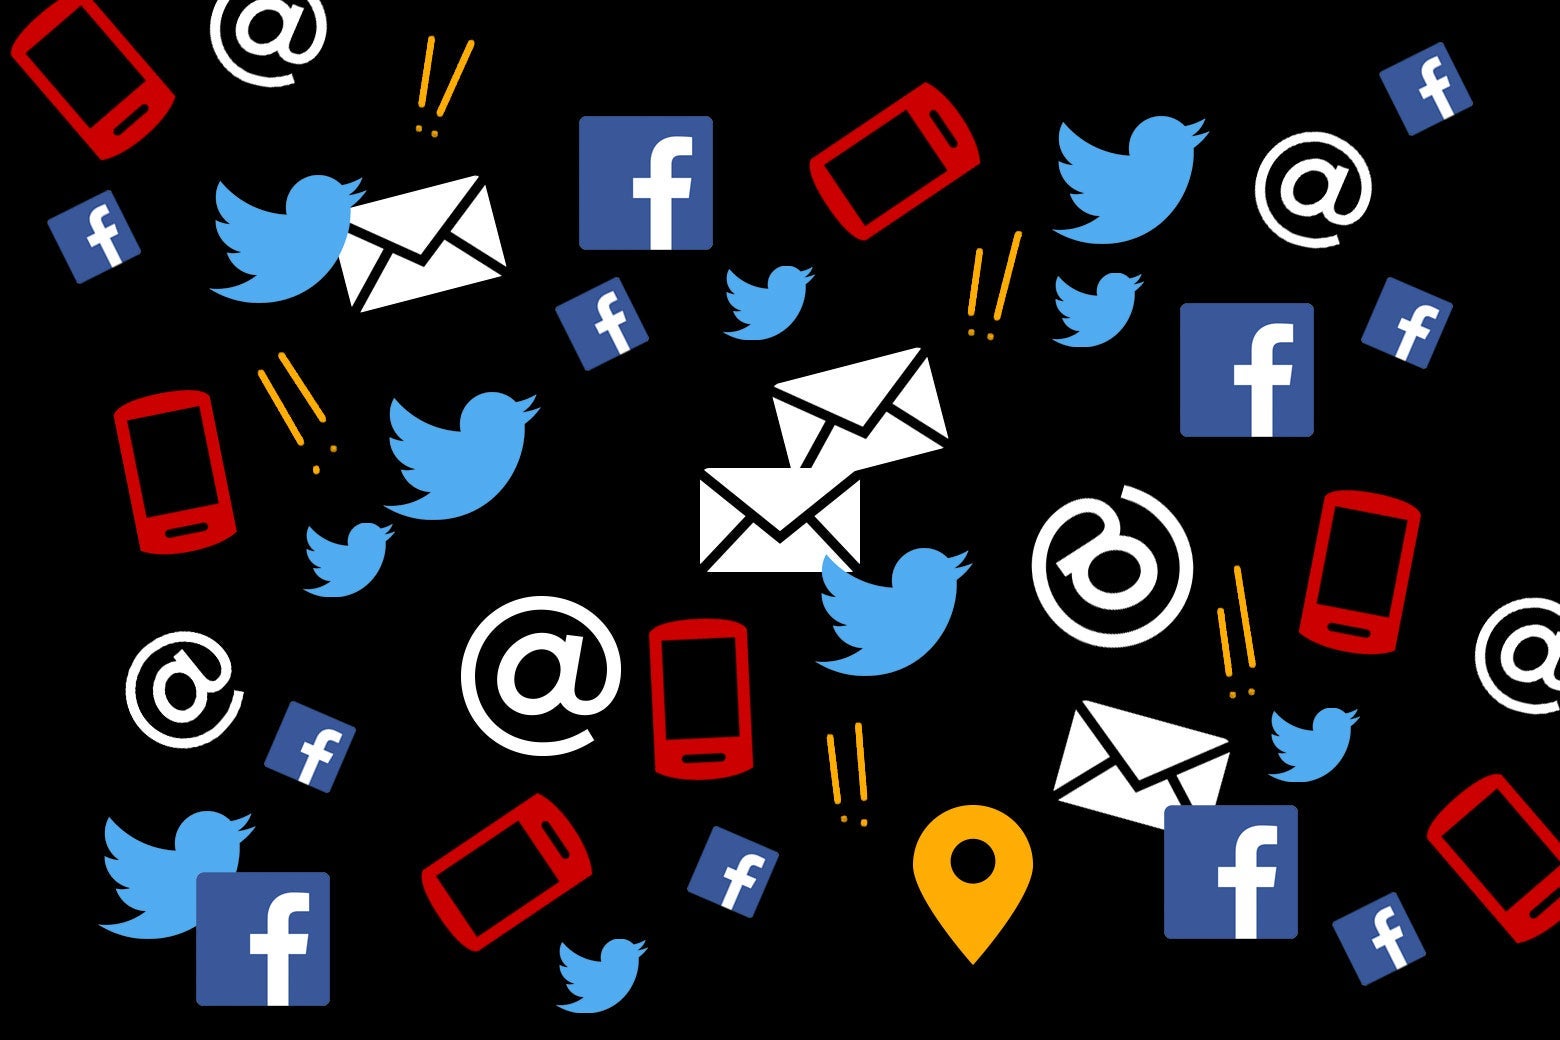 A collage of Facebook logos, Twitter birds, email icons, smartphone symbols, @ signs, location symbols, and exclamation points.